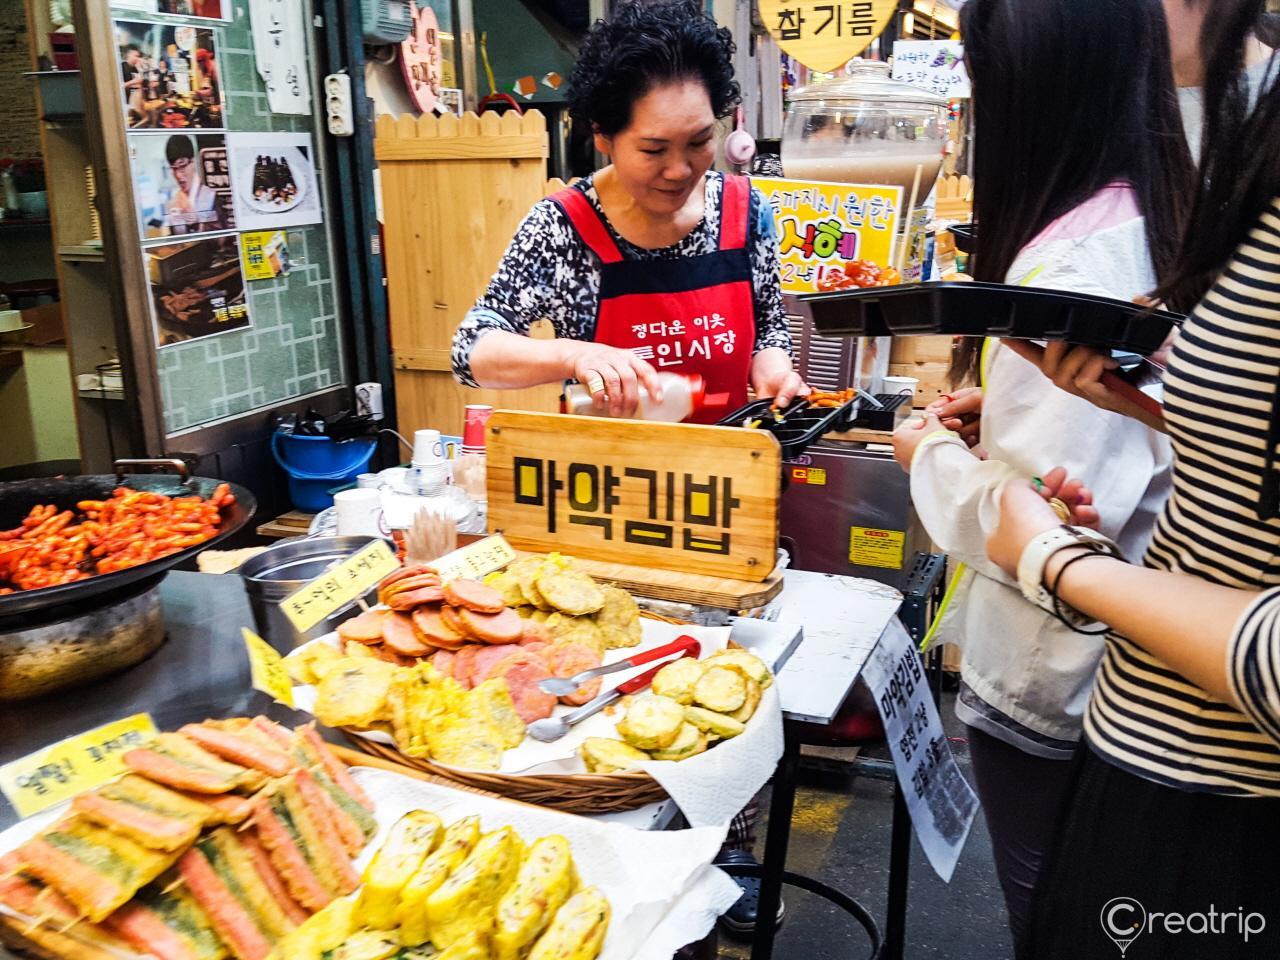 A bustling food market in Korea selling delicious, fast cuisine to eager customers.